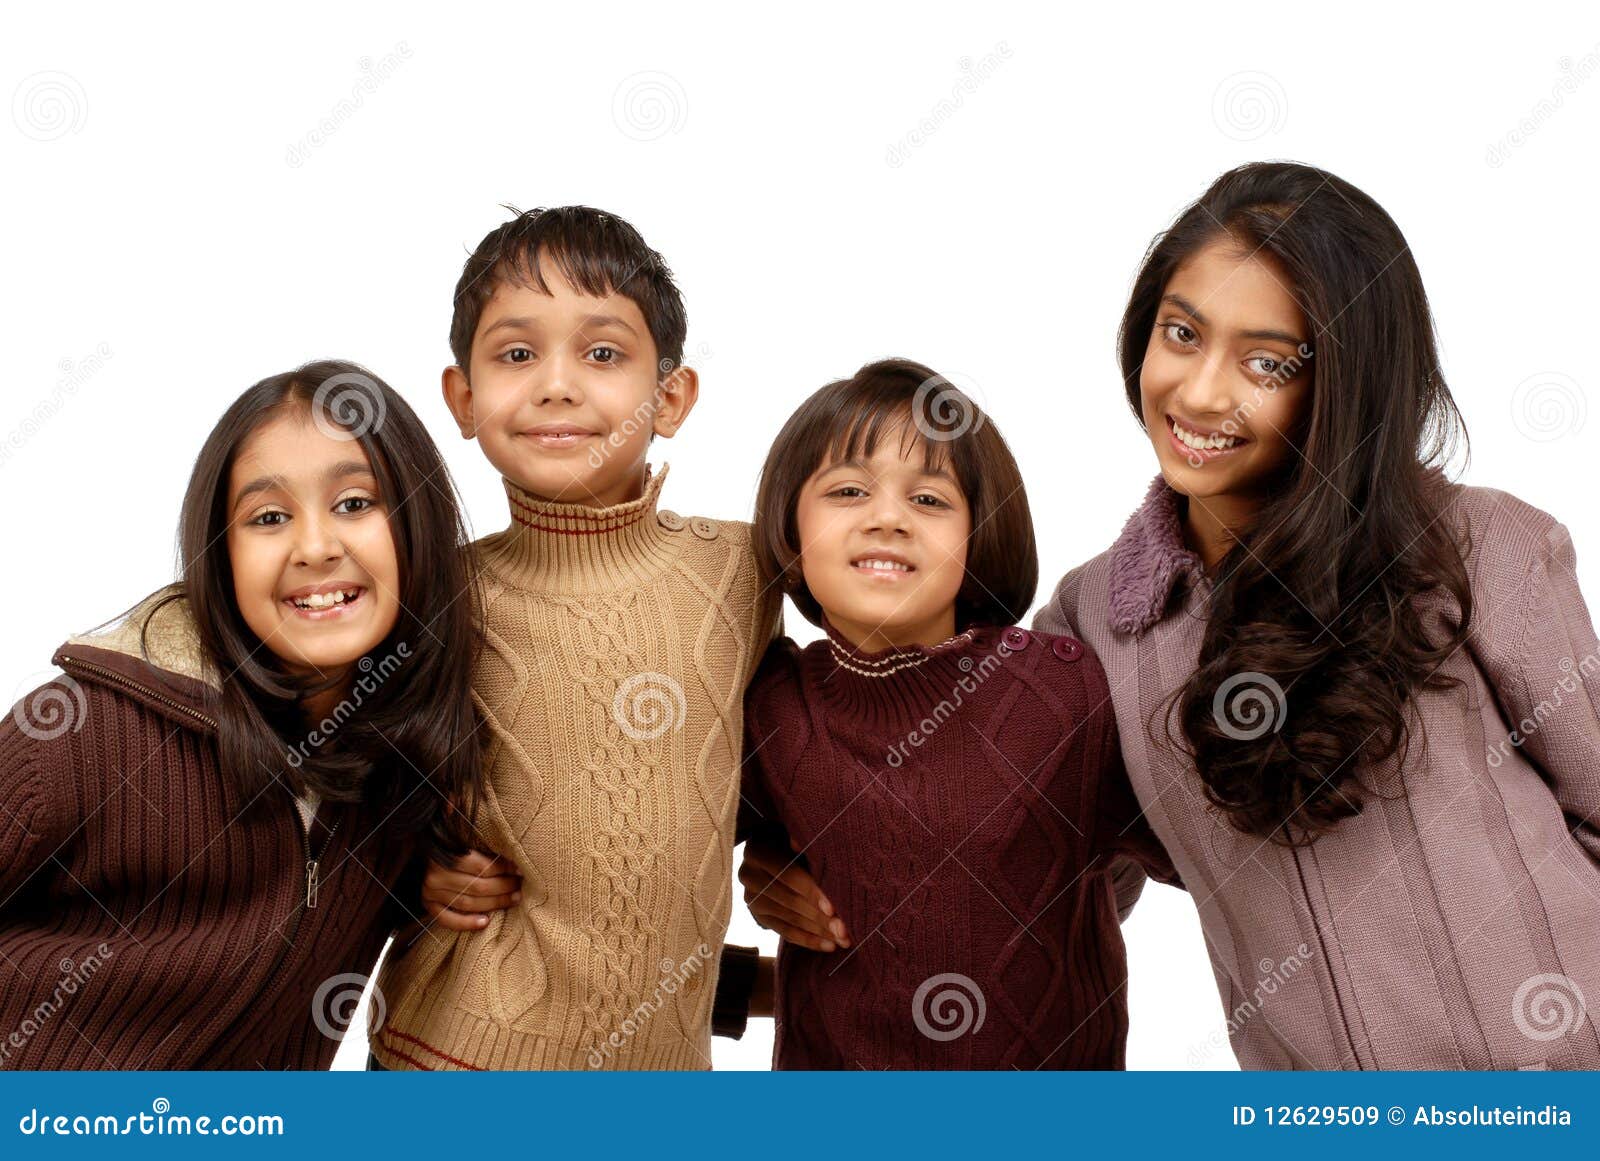 Indian Brothers and Three Sisters Stock Image - Image of makeup ...